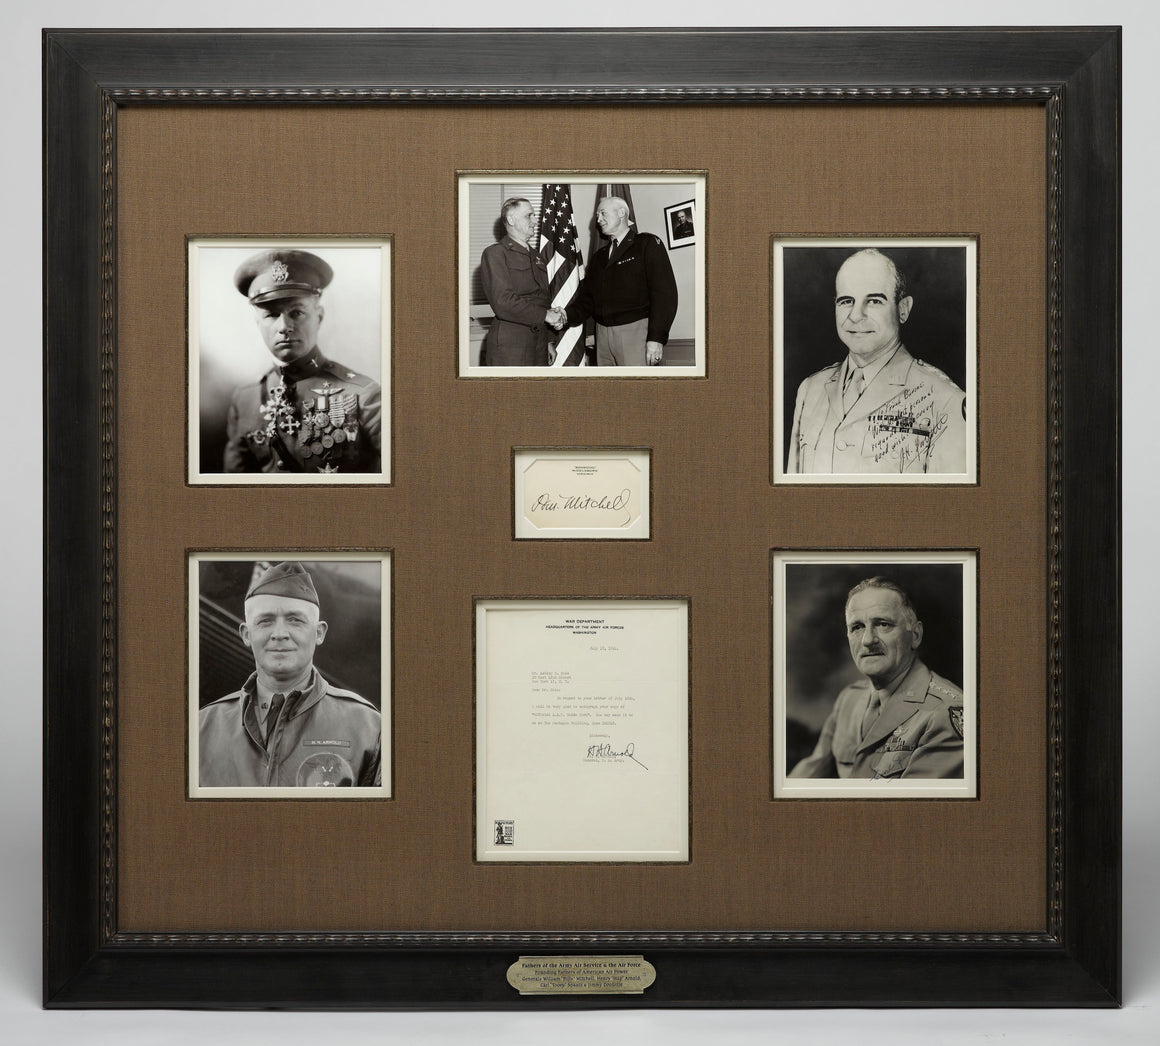 Fathers of the Air Service Collage, with Signatures of Doolittle, Spaatz, Arnold, and Mitchell